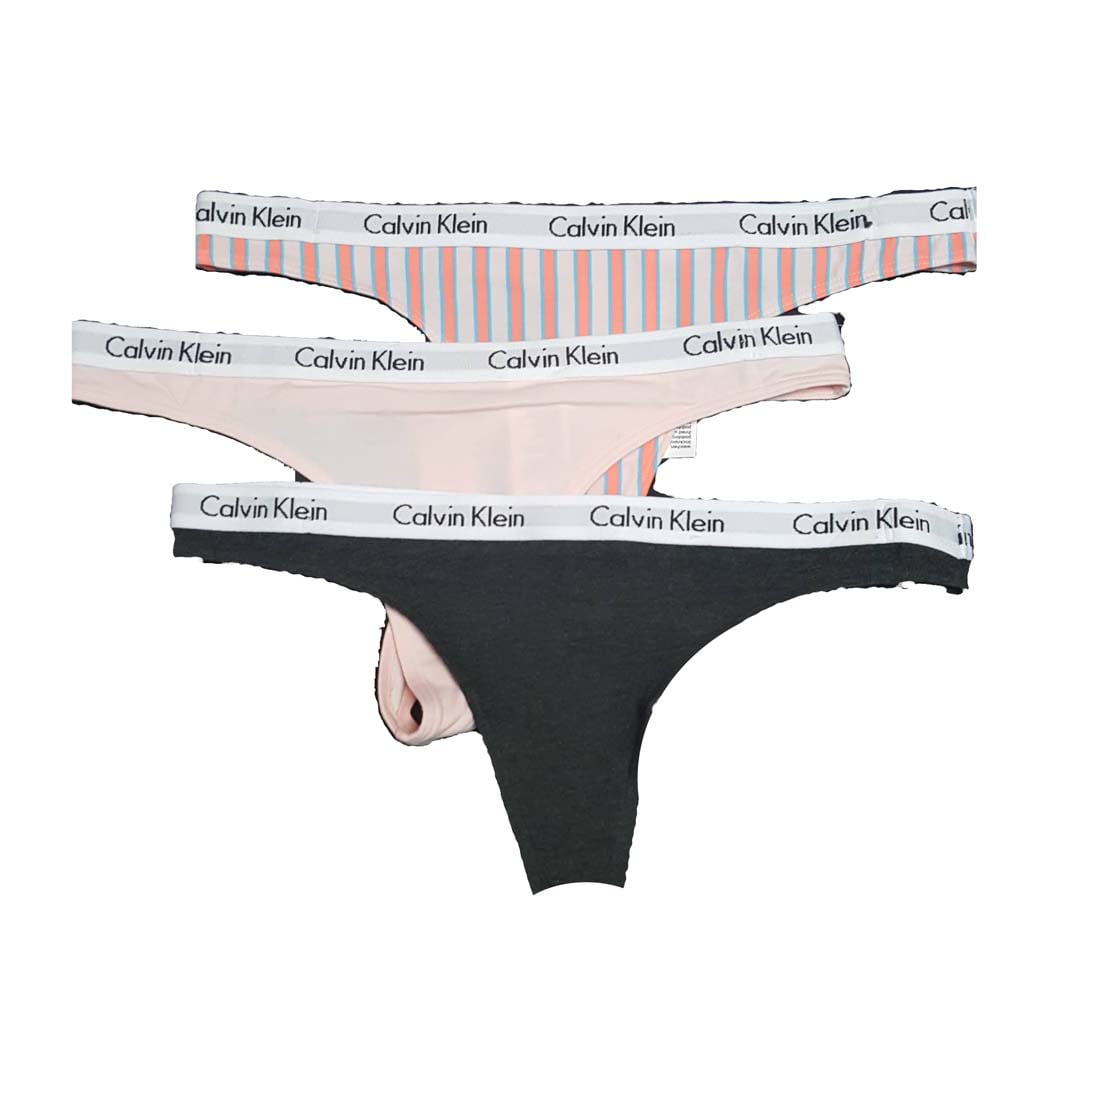 Calvin Klein of Small 816, Thongs Logo 3, Assorted Pack